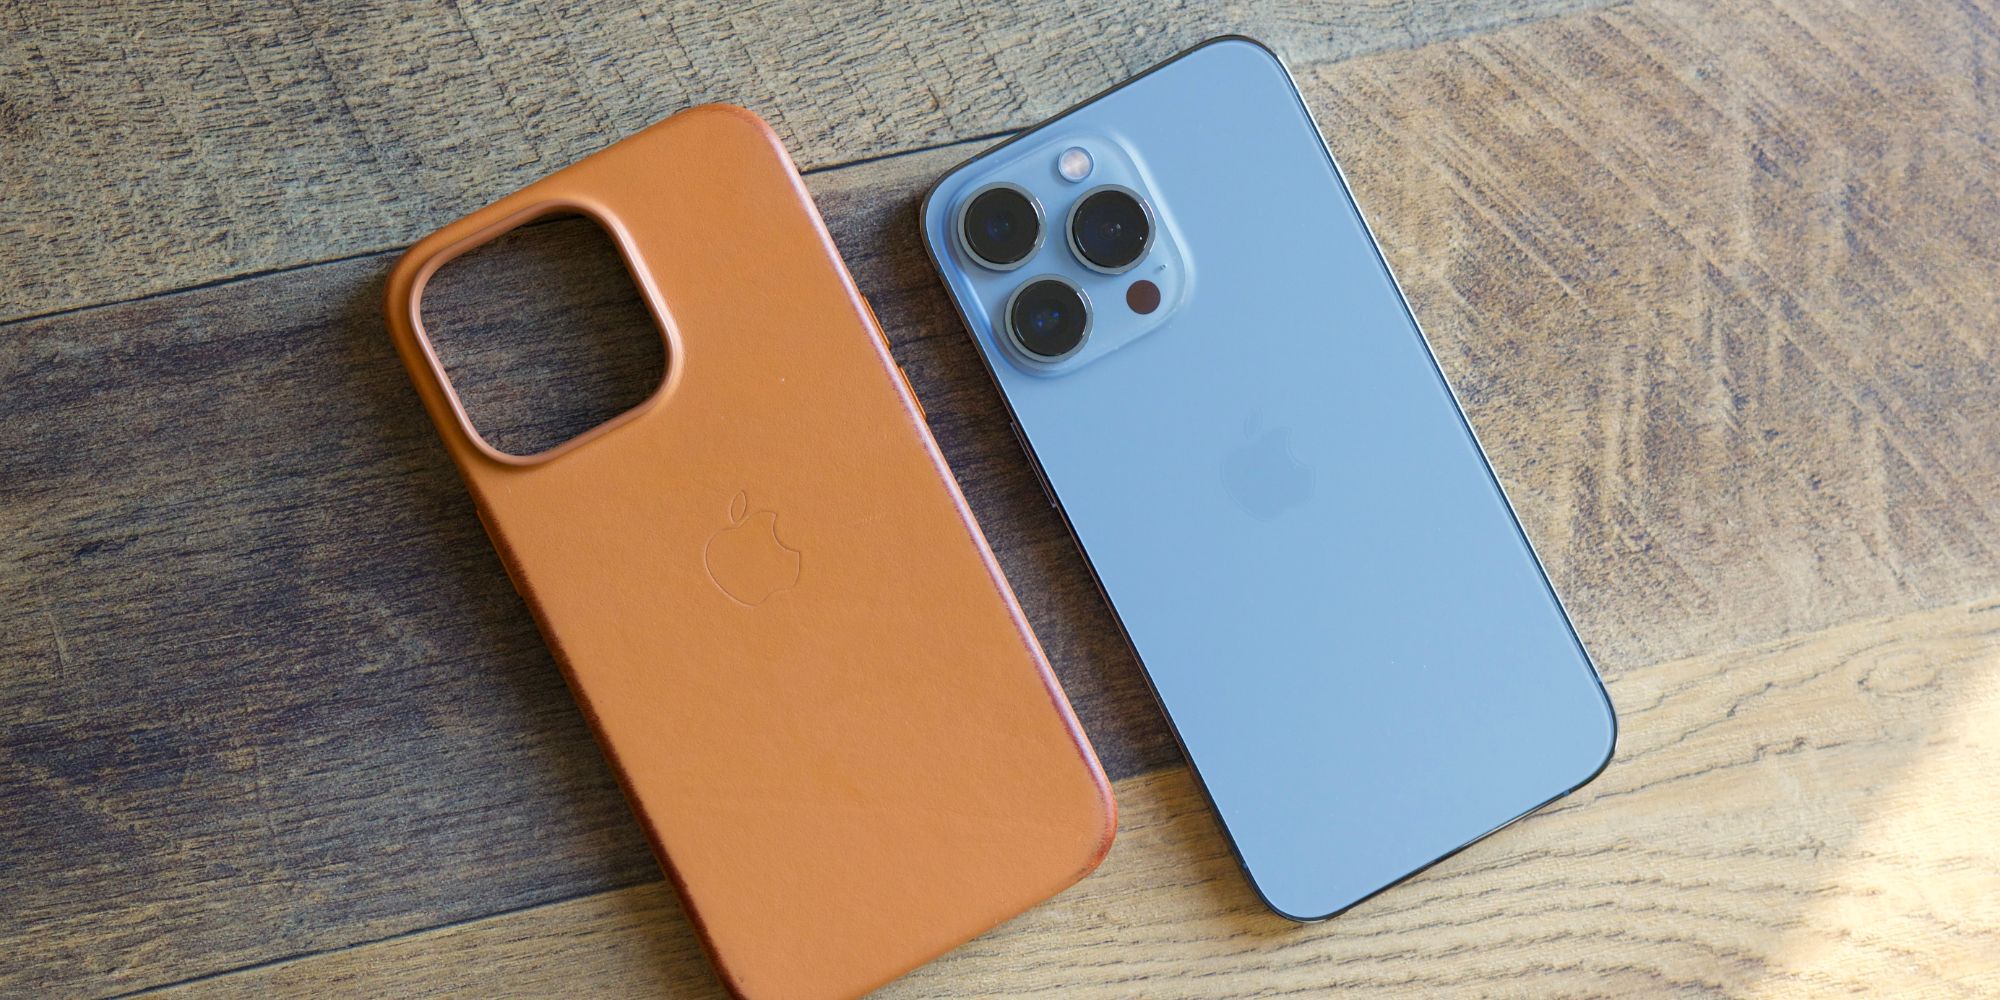 iPhone 13 Pro next to a case